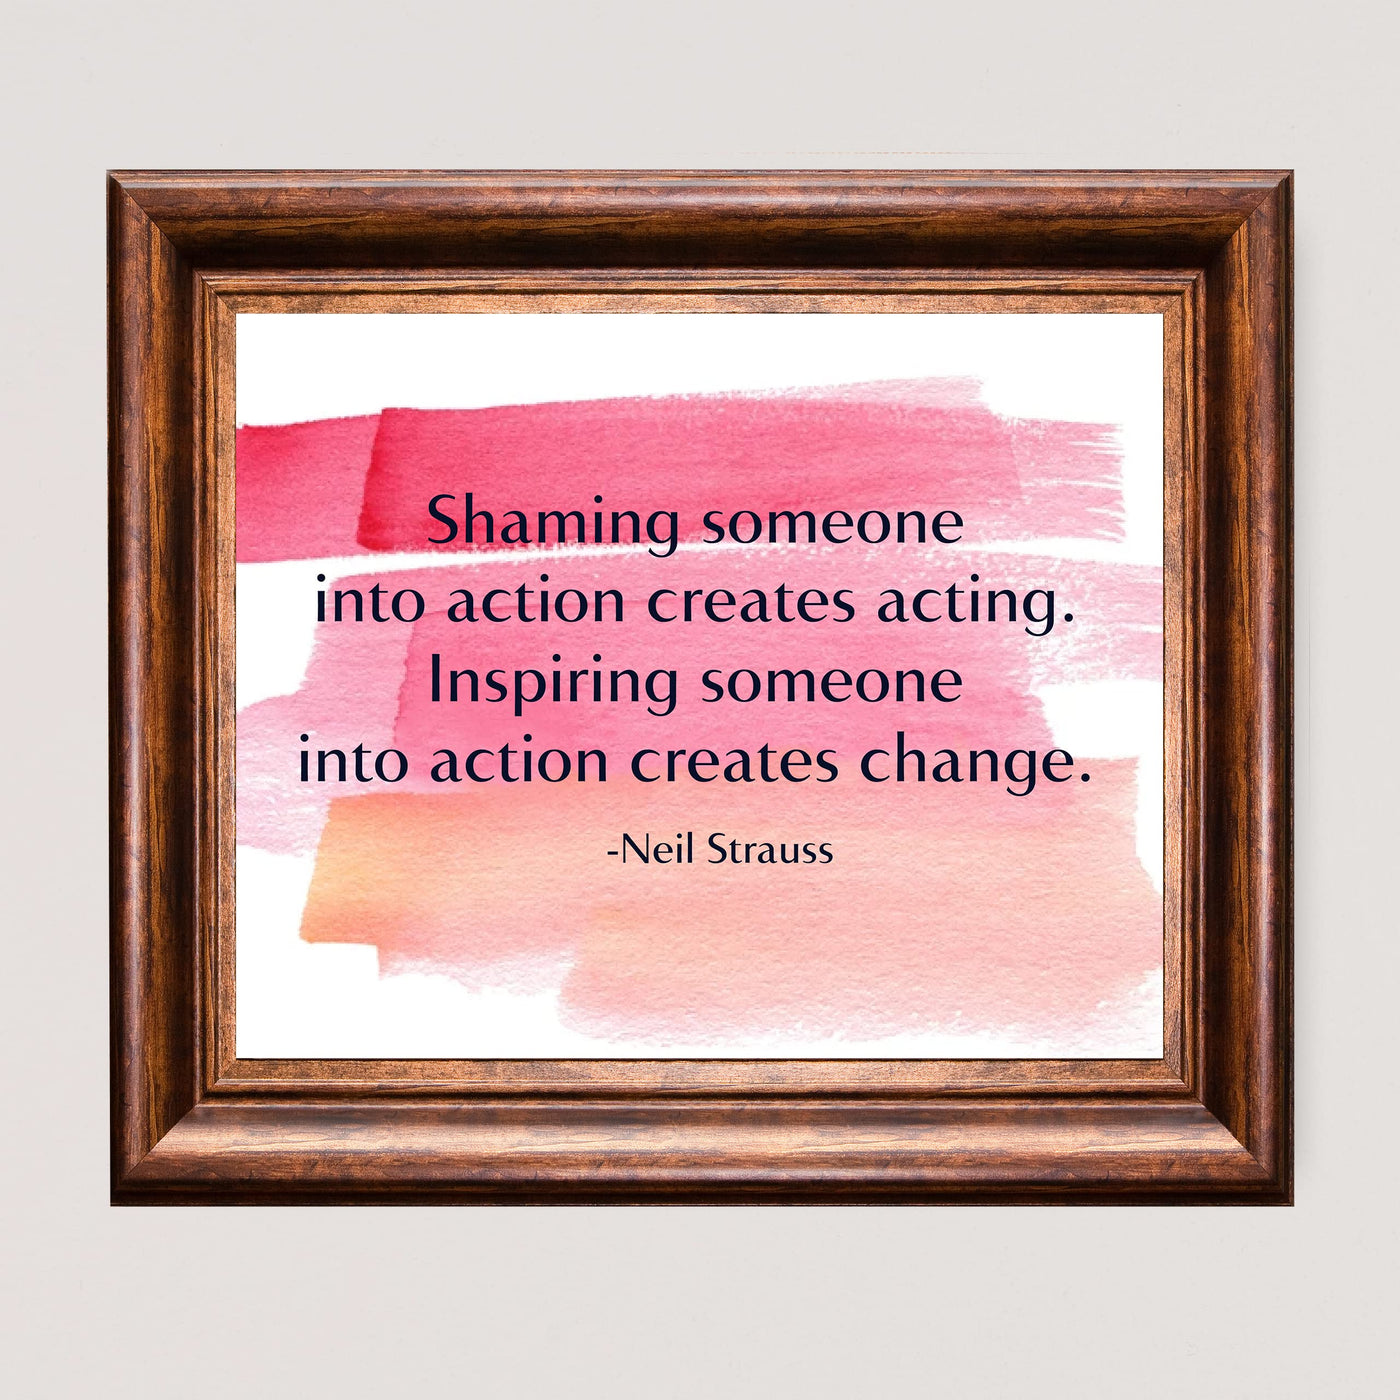 Inspiring Someone Into Action Creates Change Motivational Quotes Wall Decor -10 x 8" Inspirational Replica Watercolor Art Print-Ready to Frame. Modern Home-Office-Desk-School-Motivation Decor!